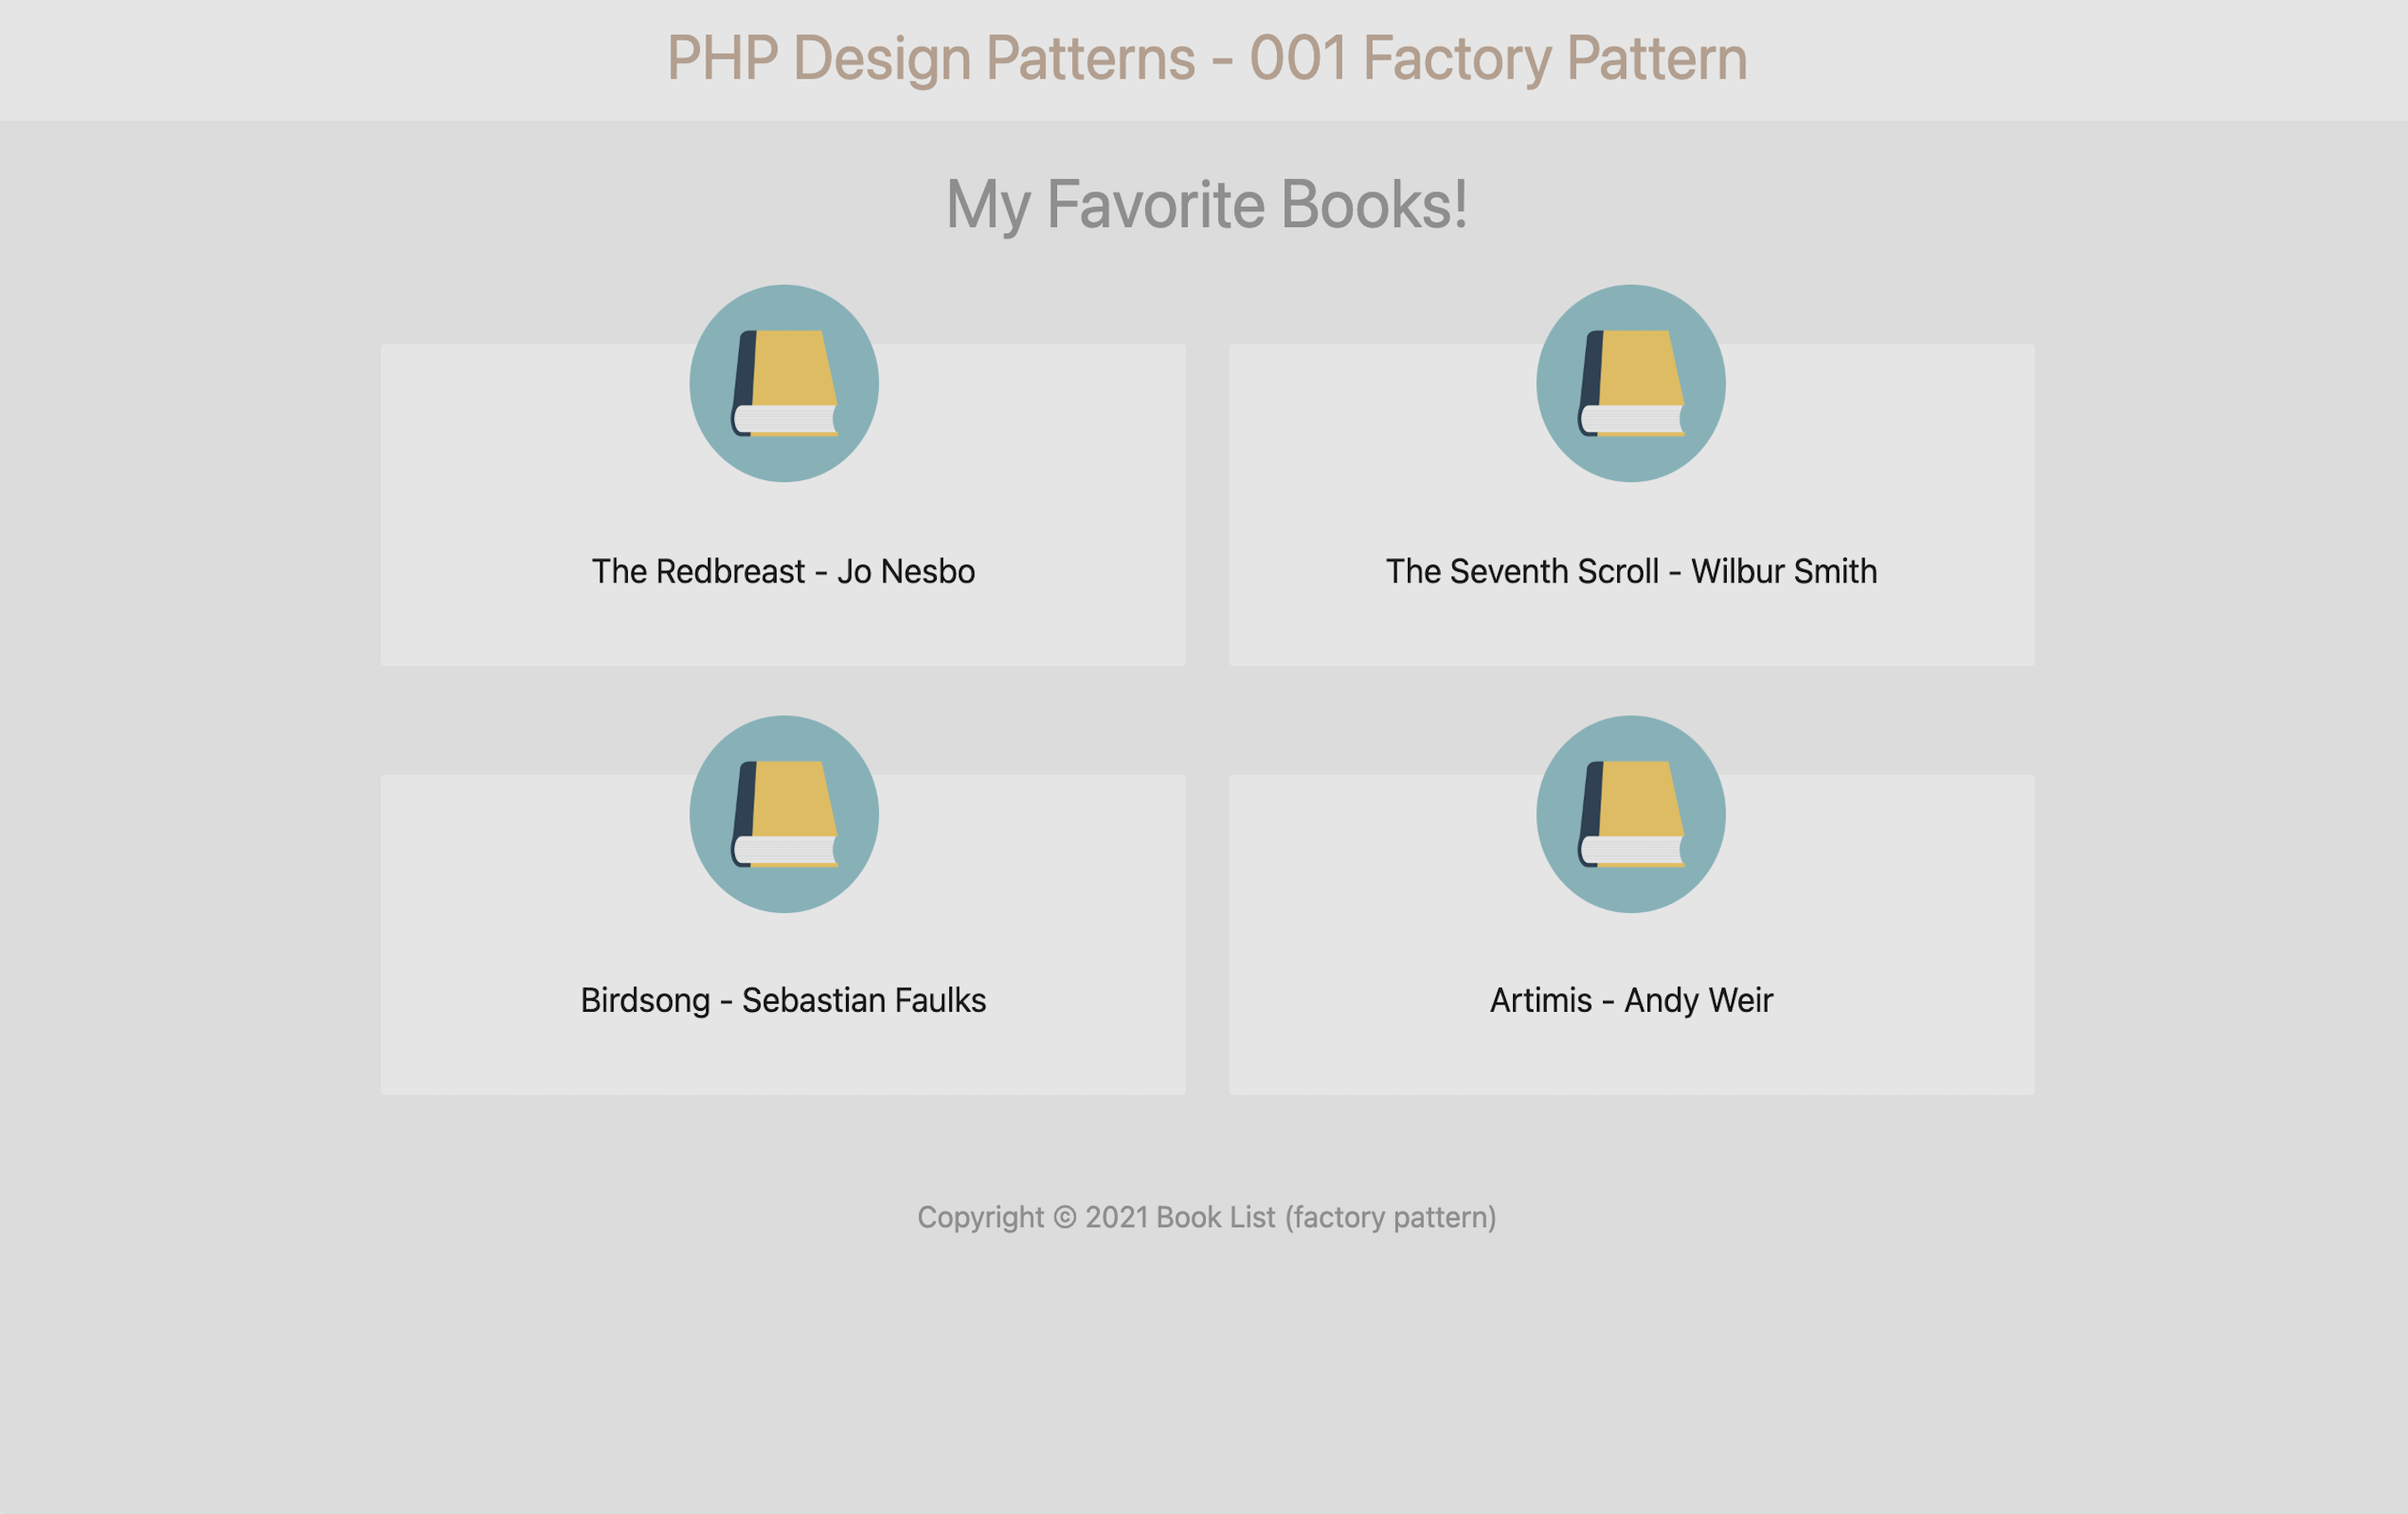 PHP Design Patterns - Factory Pattern